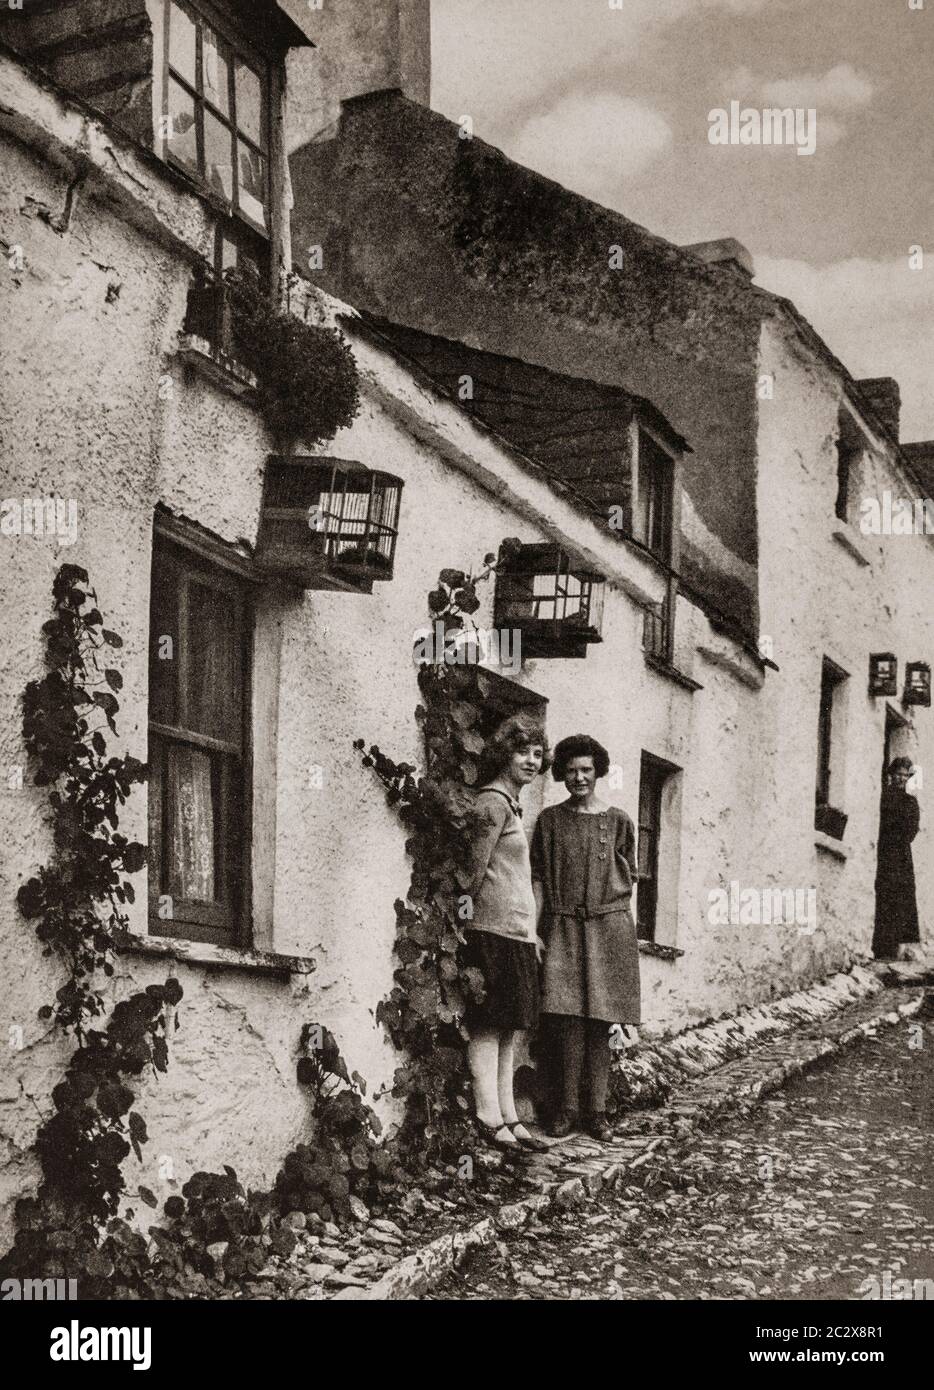 In early 1920's, birdcages were often hung outside houses in Cobh in County Cork, Ireland. Originally photographed by Clifton Adams (1890-1934) for 'Ireland: The Rock Whence I Was Hewn', a National Geographic Magazine feature from March 1927. Stock Photo